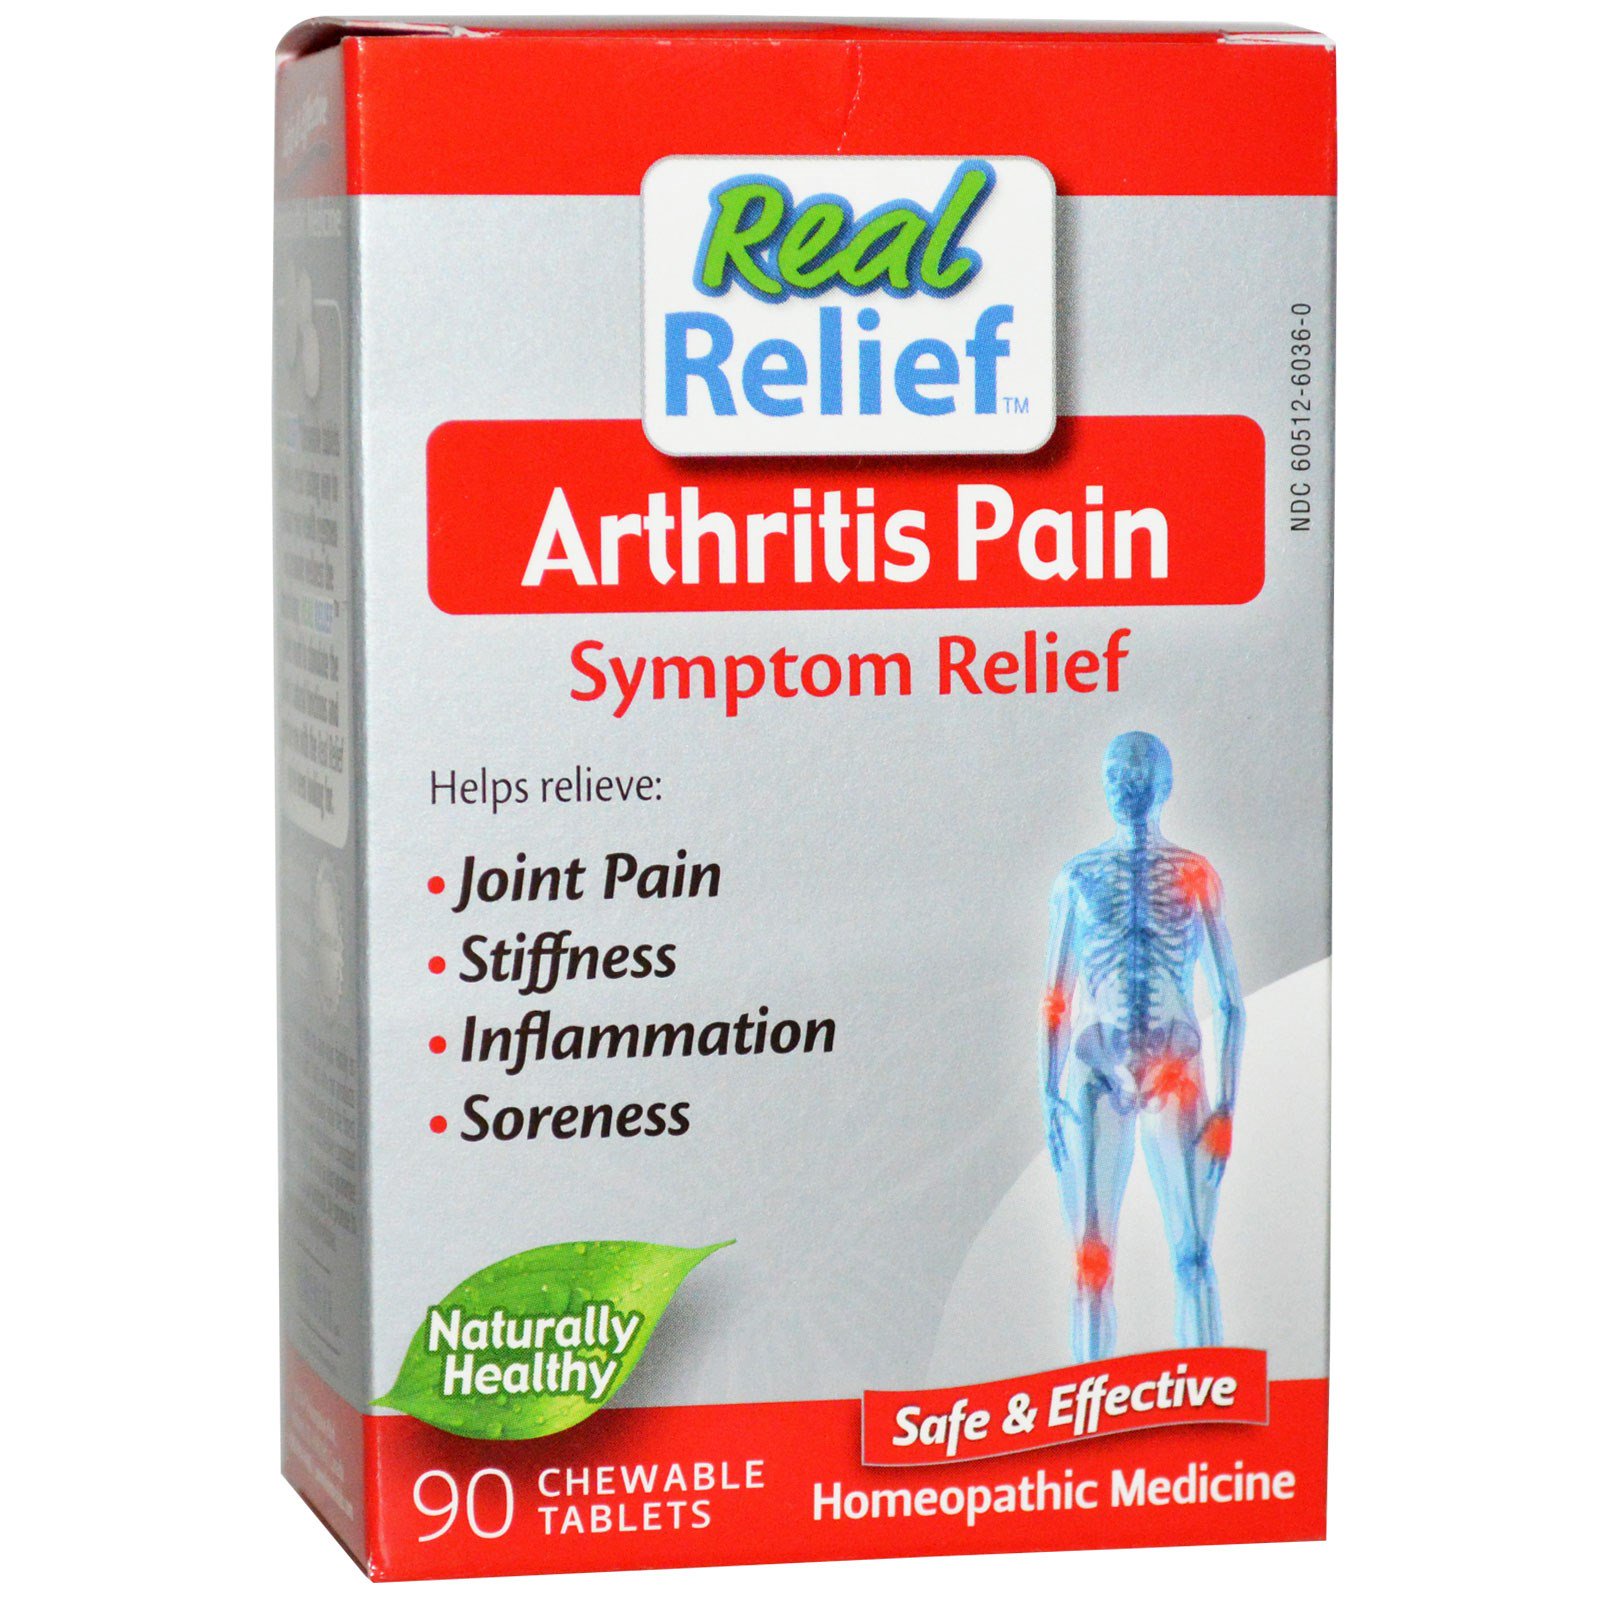 Medicine For Joint Pain